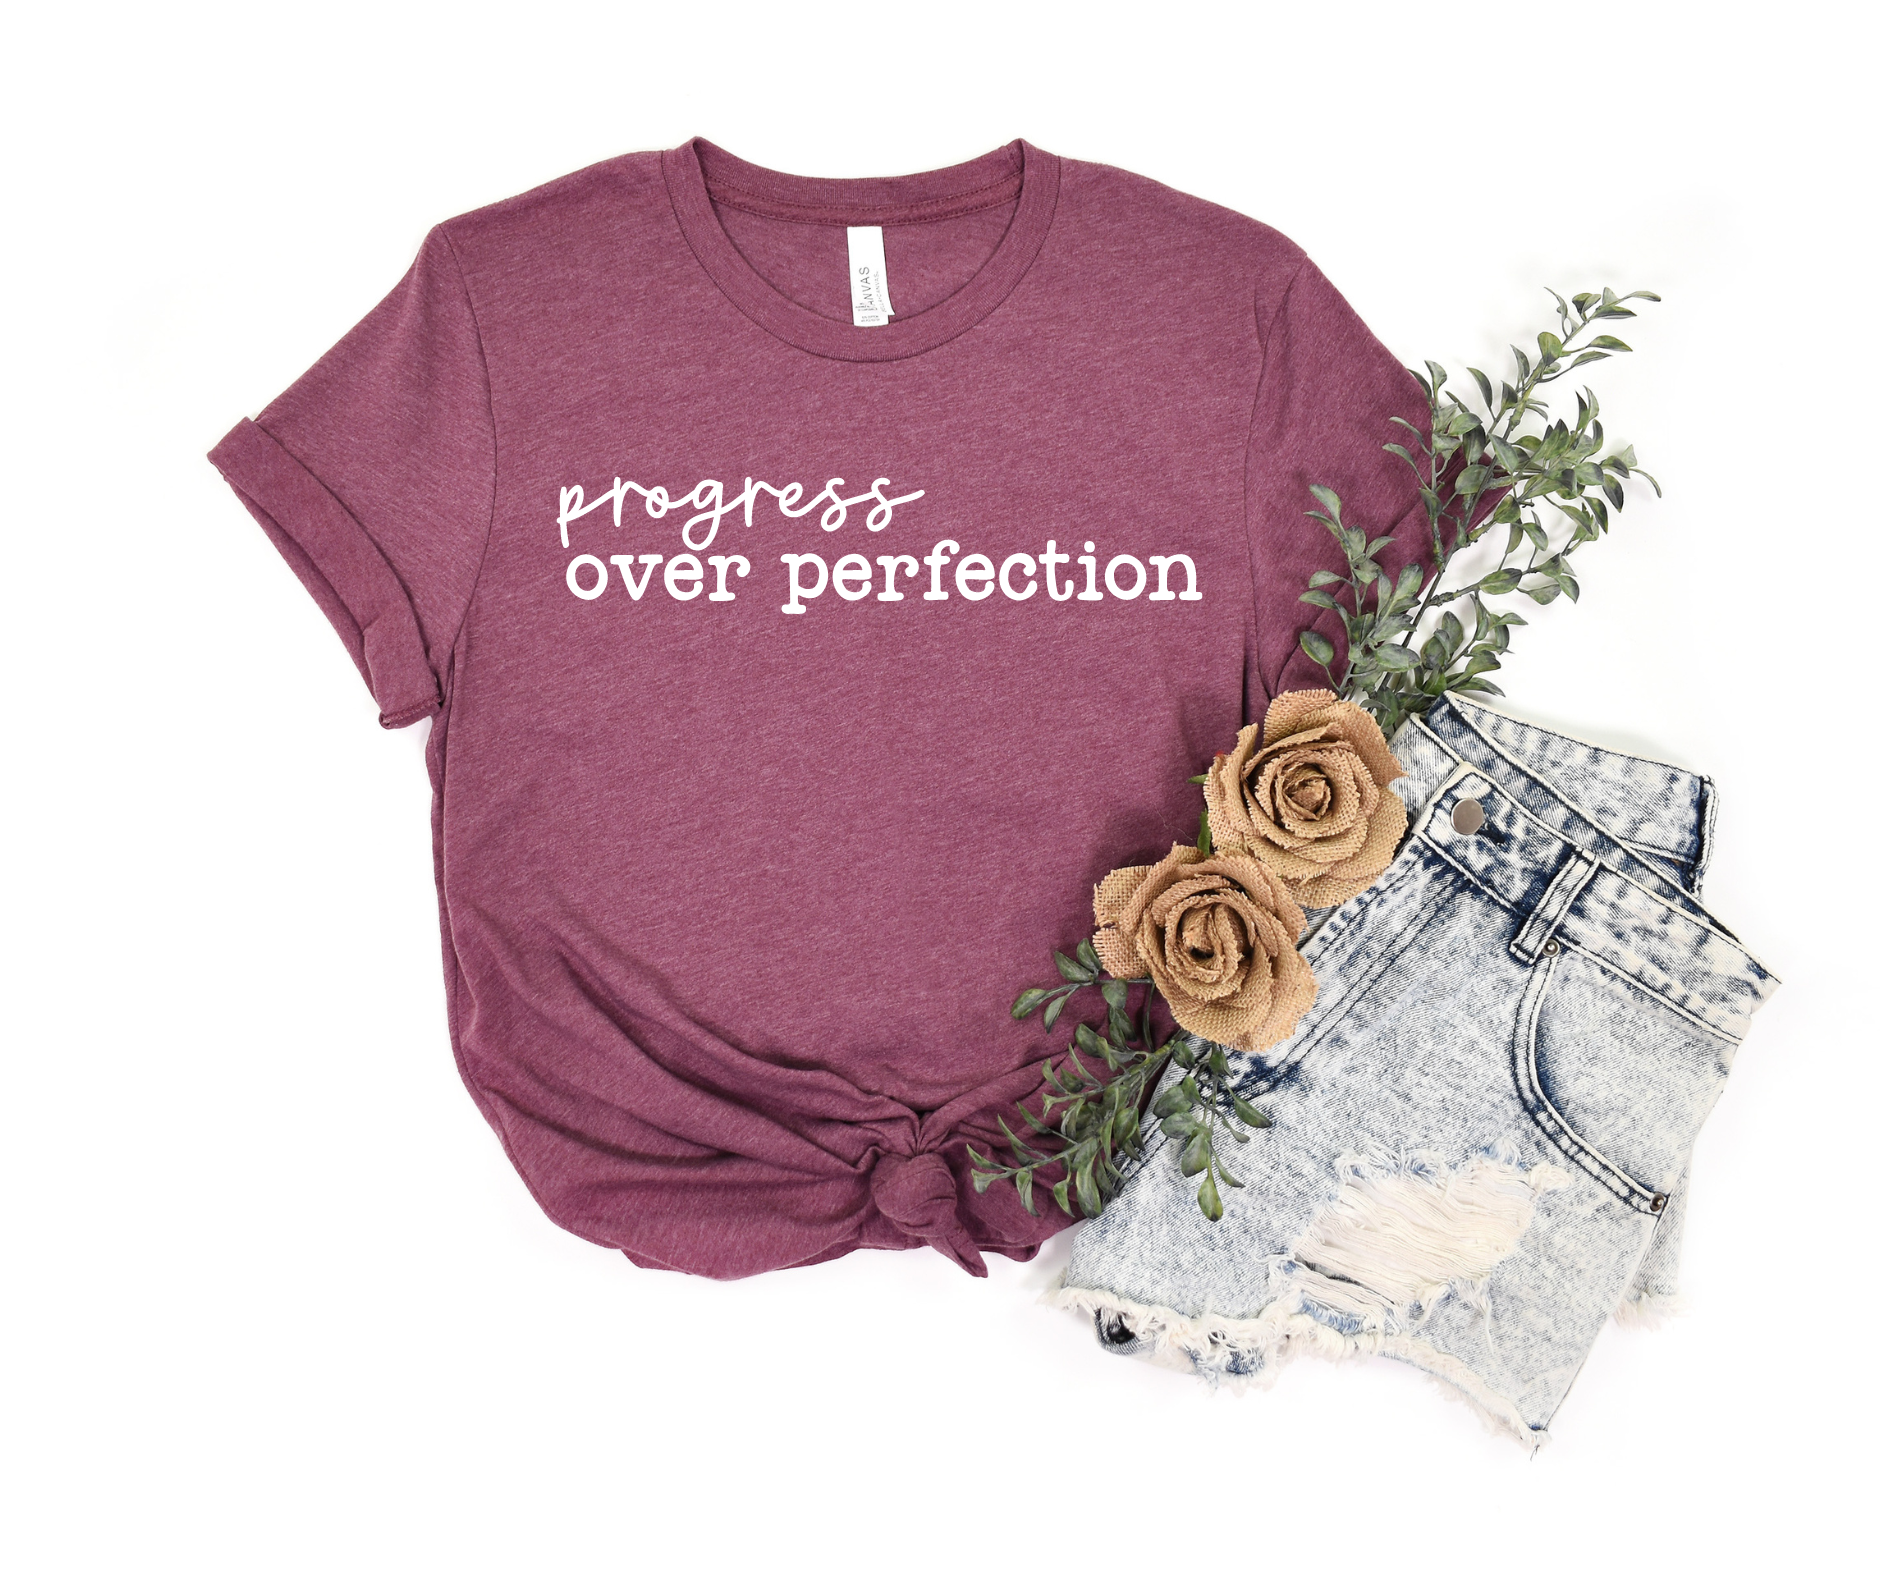 PREORDER: Progress Over Perfection Graphic Tee